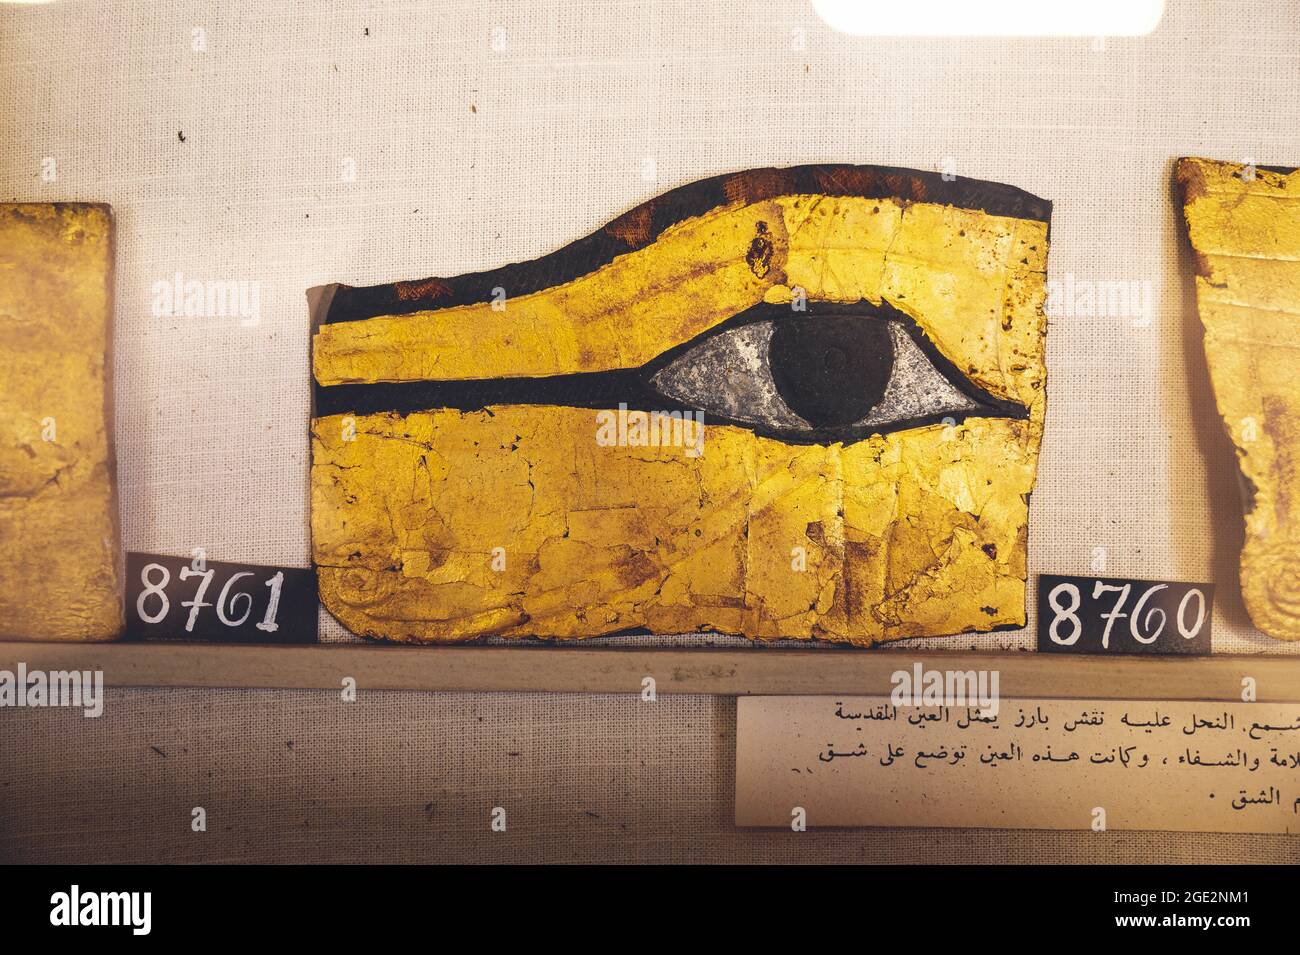 CAIRO, EGYPT - Jun 06, 2021: An ancient slab of stone depicting the eye of Horus in the Egyptian Museum in Cairo with Arabic text below it Stock Photo